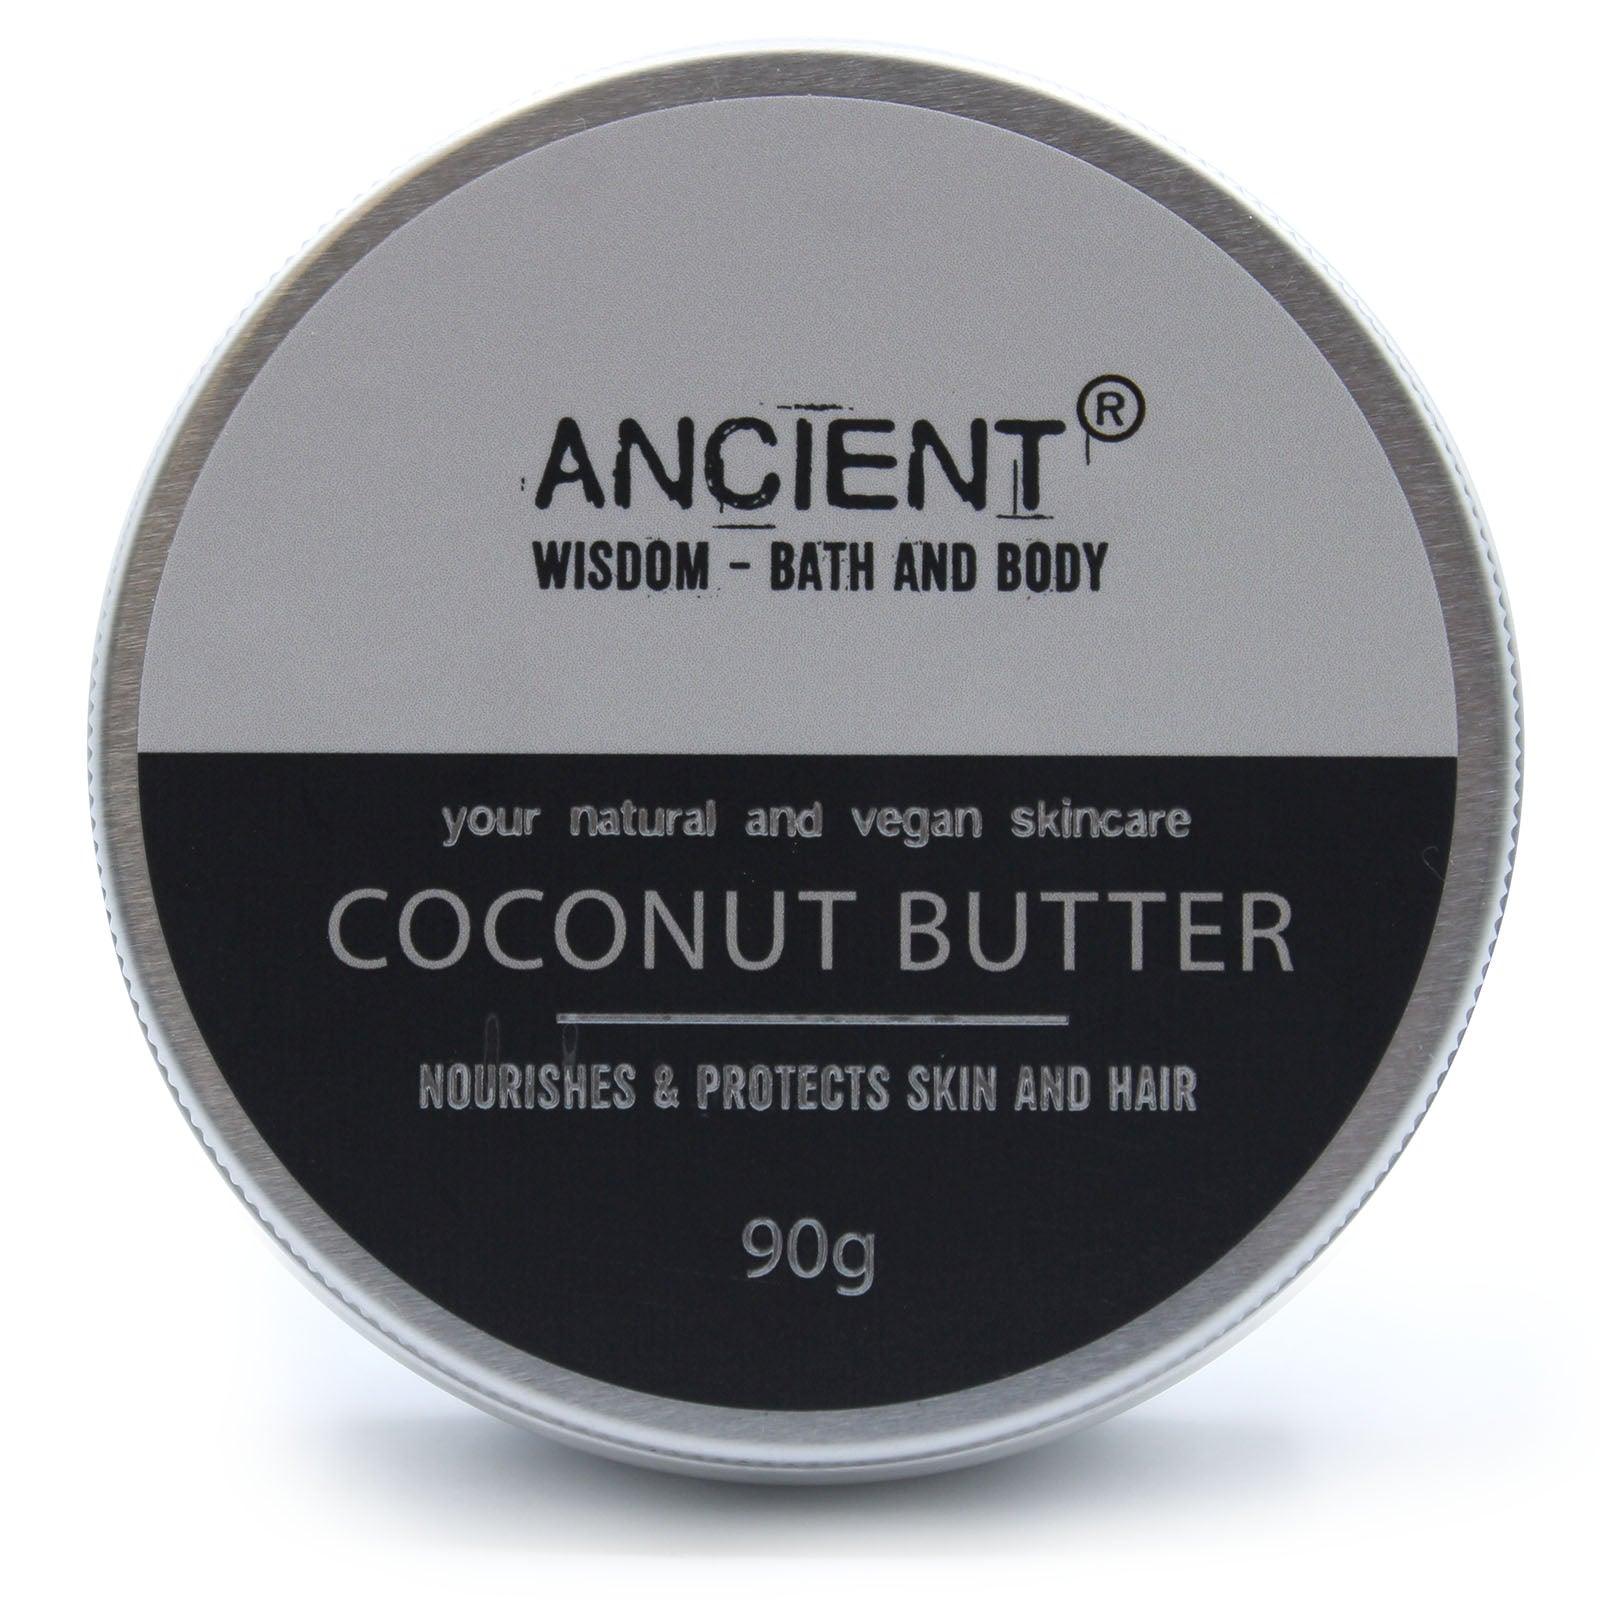 Pure Body Butter 90g - Coconut Butter - DuvetDay.co.uk